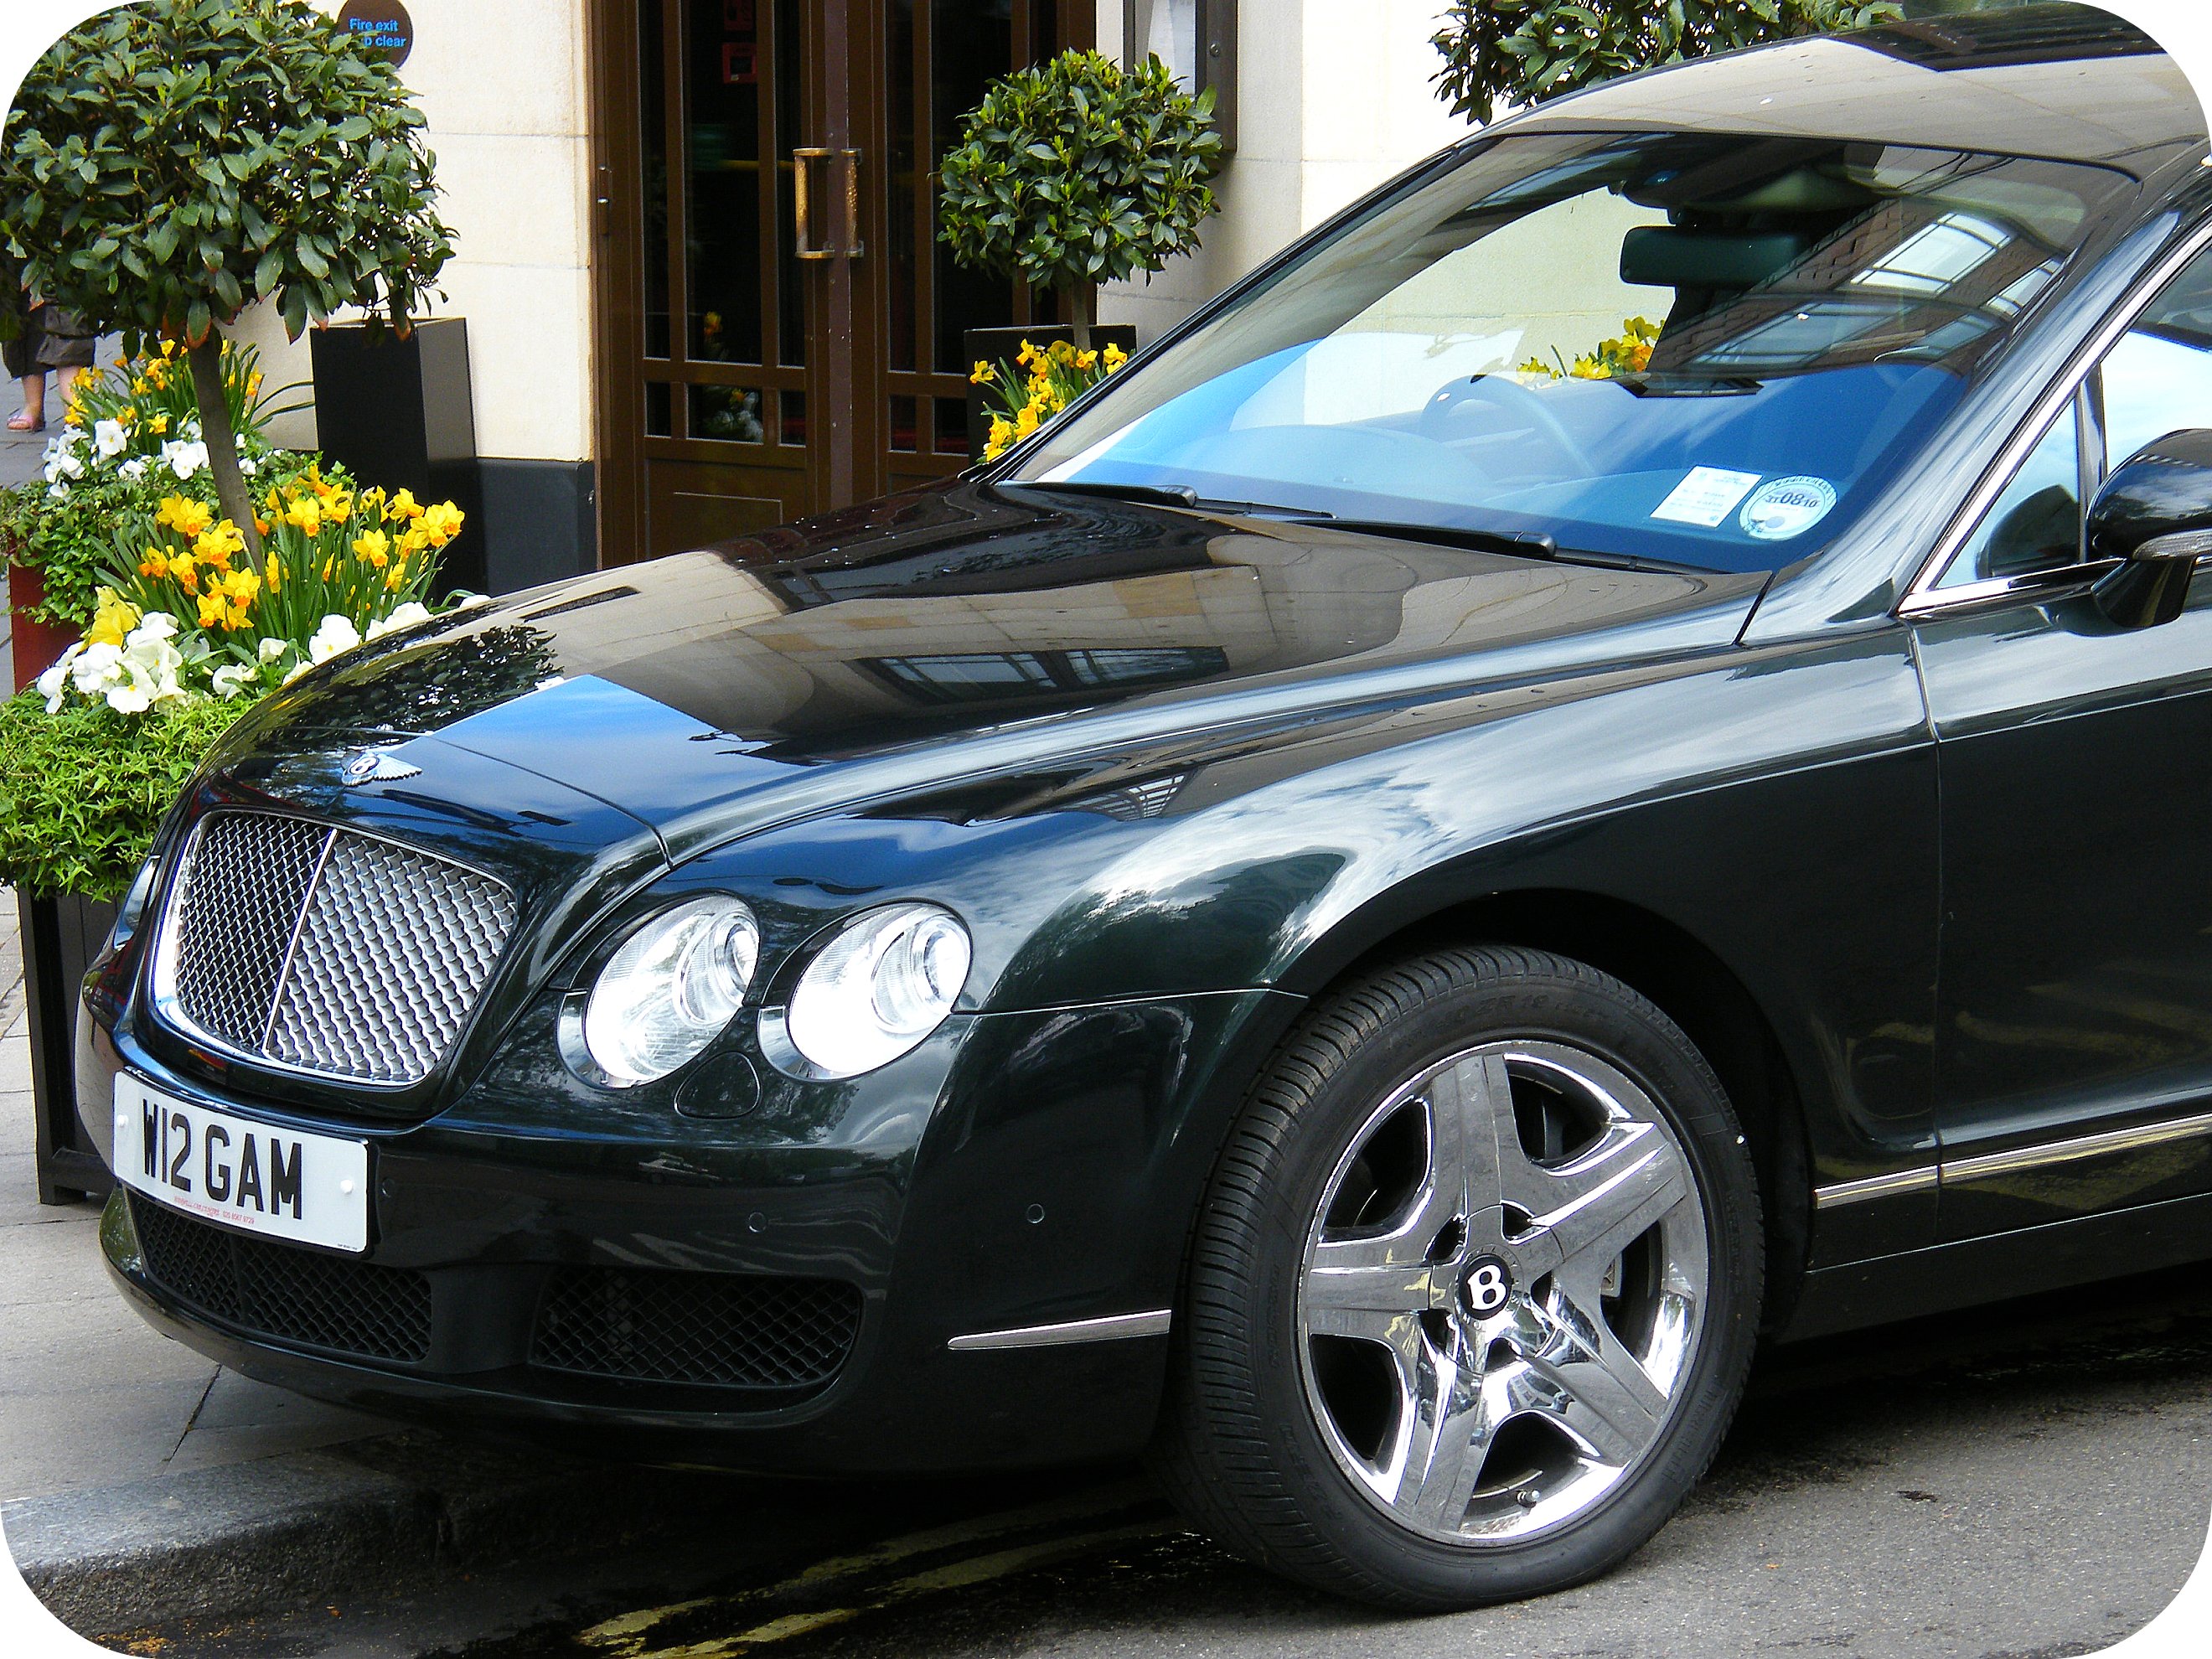 Black Bentley @ The beautiful Dorchester Hotel in London Mayfair, England United Kingdom. One of the most recognized and luxurious hotels on the planet. Enjoy! ) (4579377489) (2)